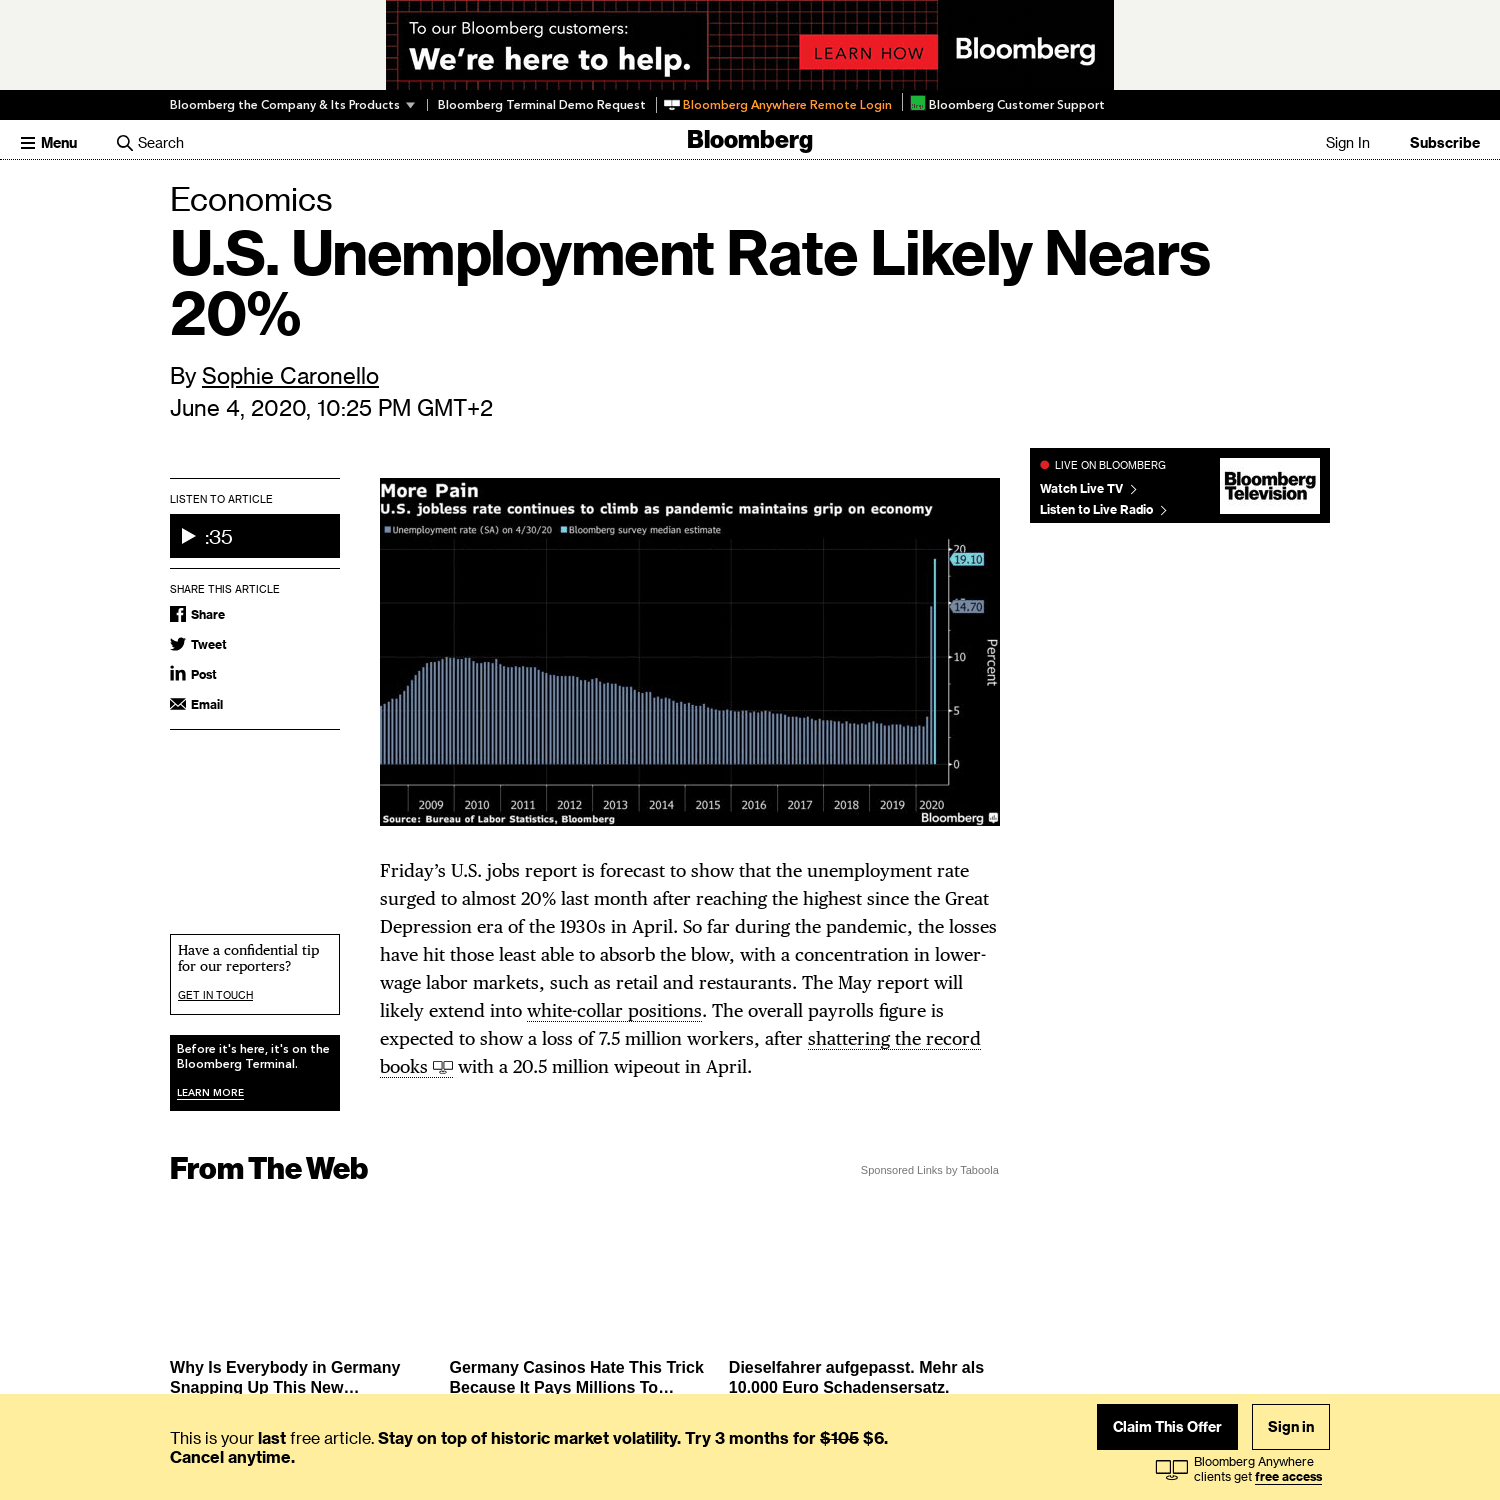 U.S. Unemployment Rate Likely Nears 20%